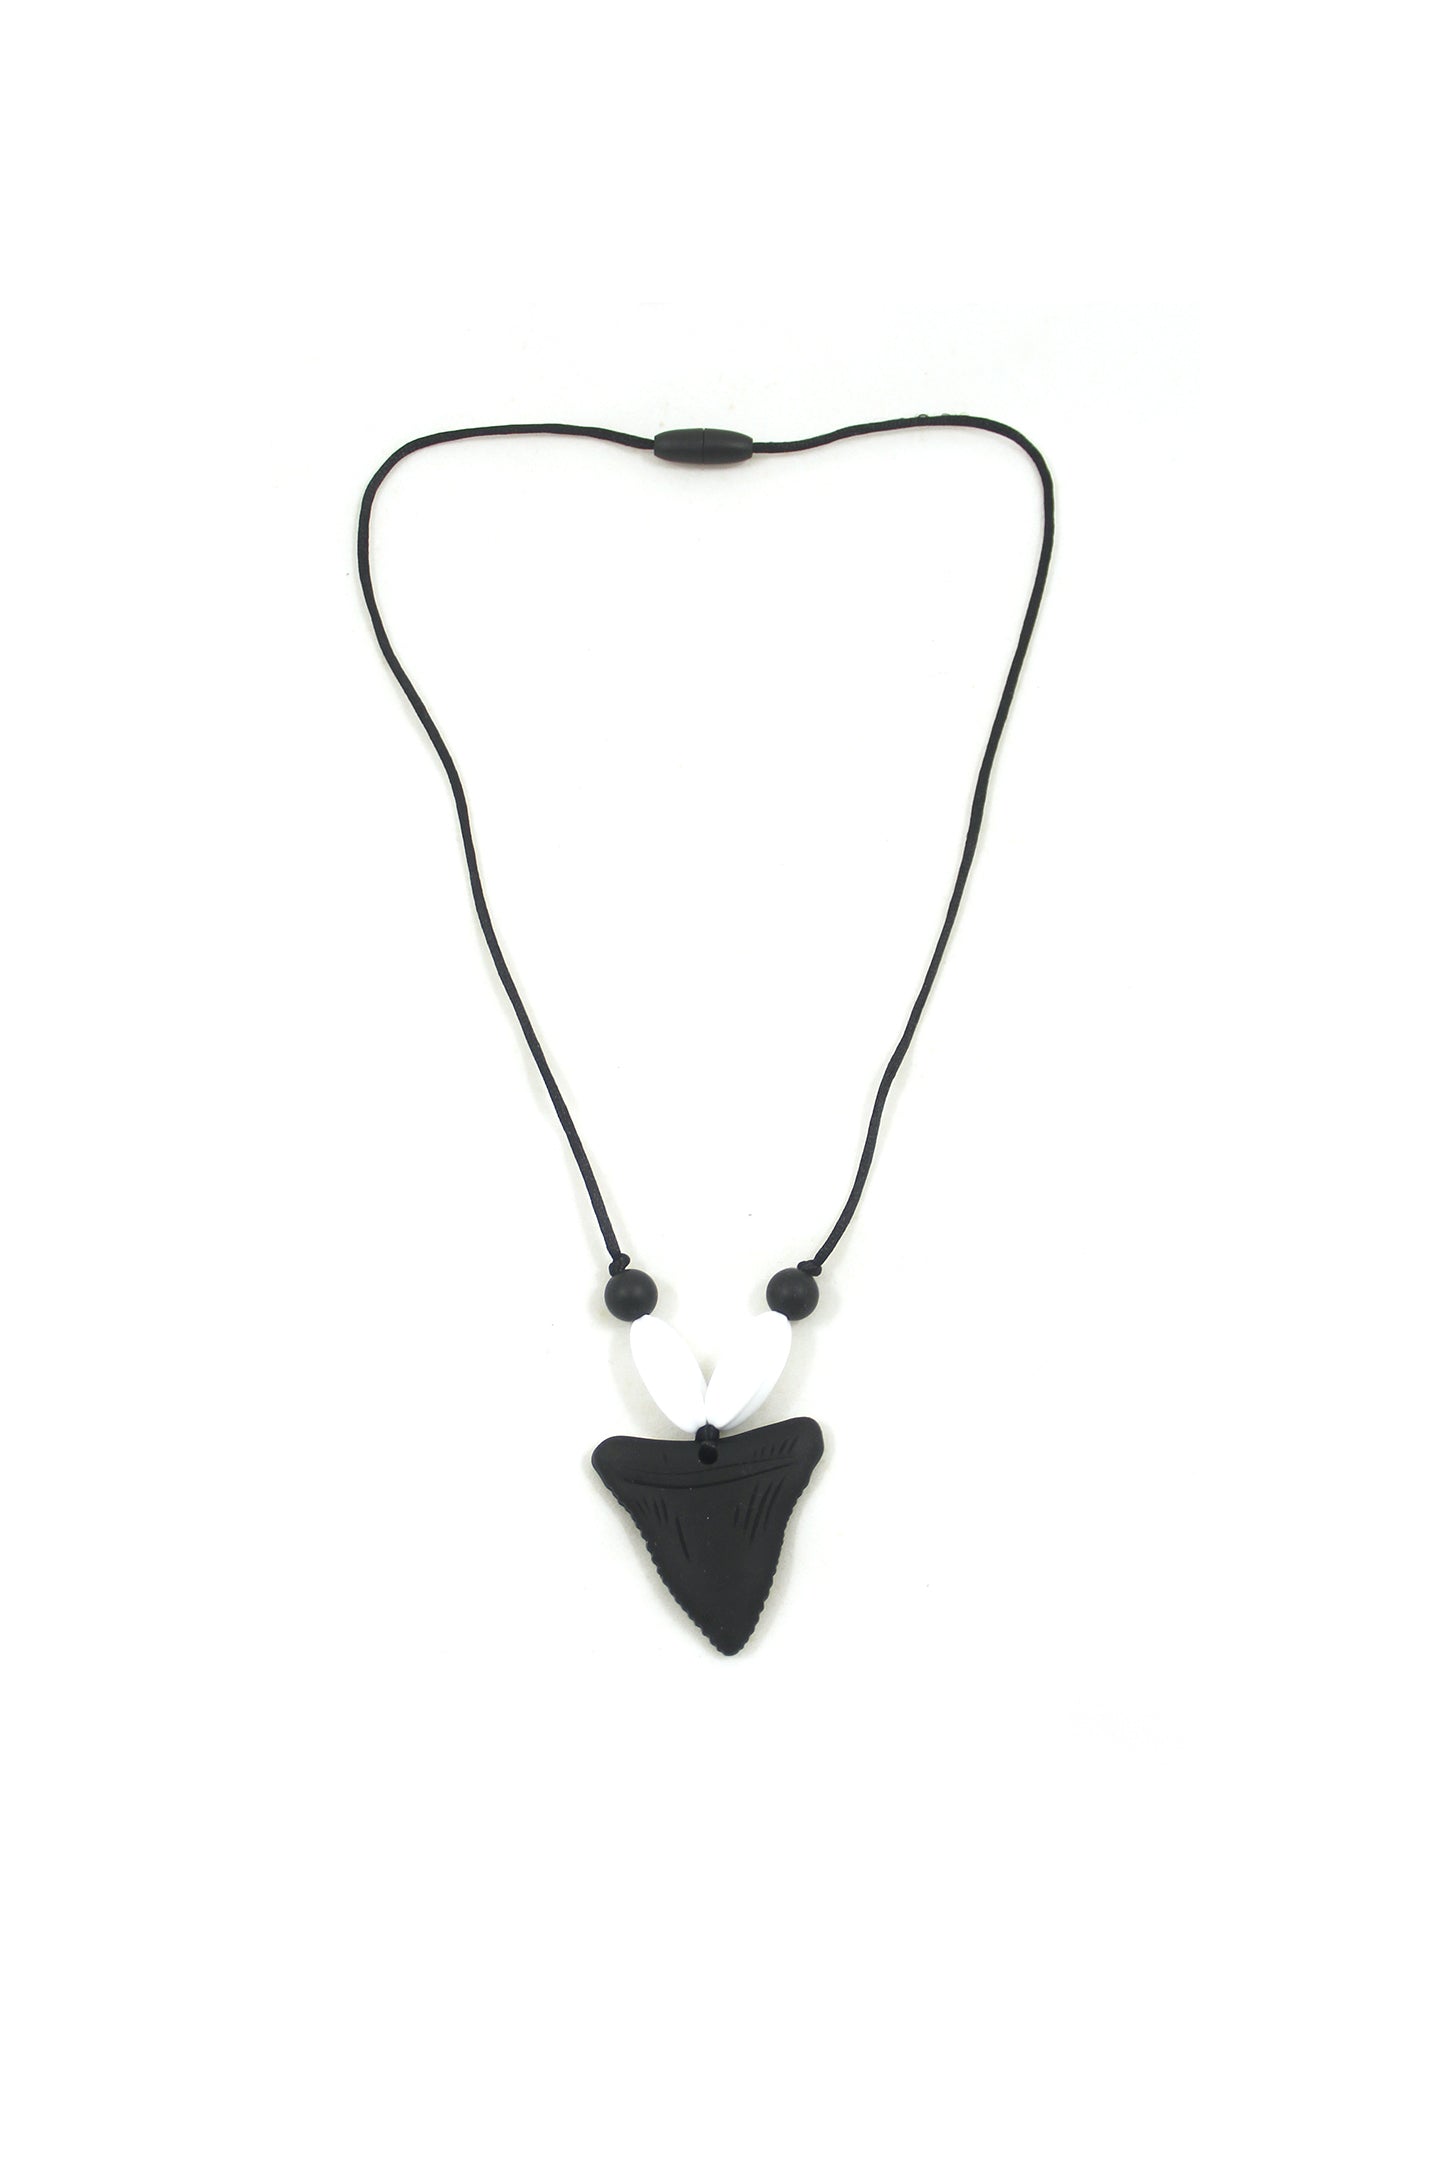 Peahi Necklace (Adult)